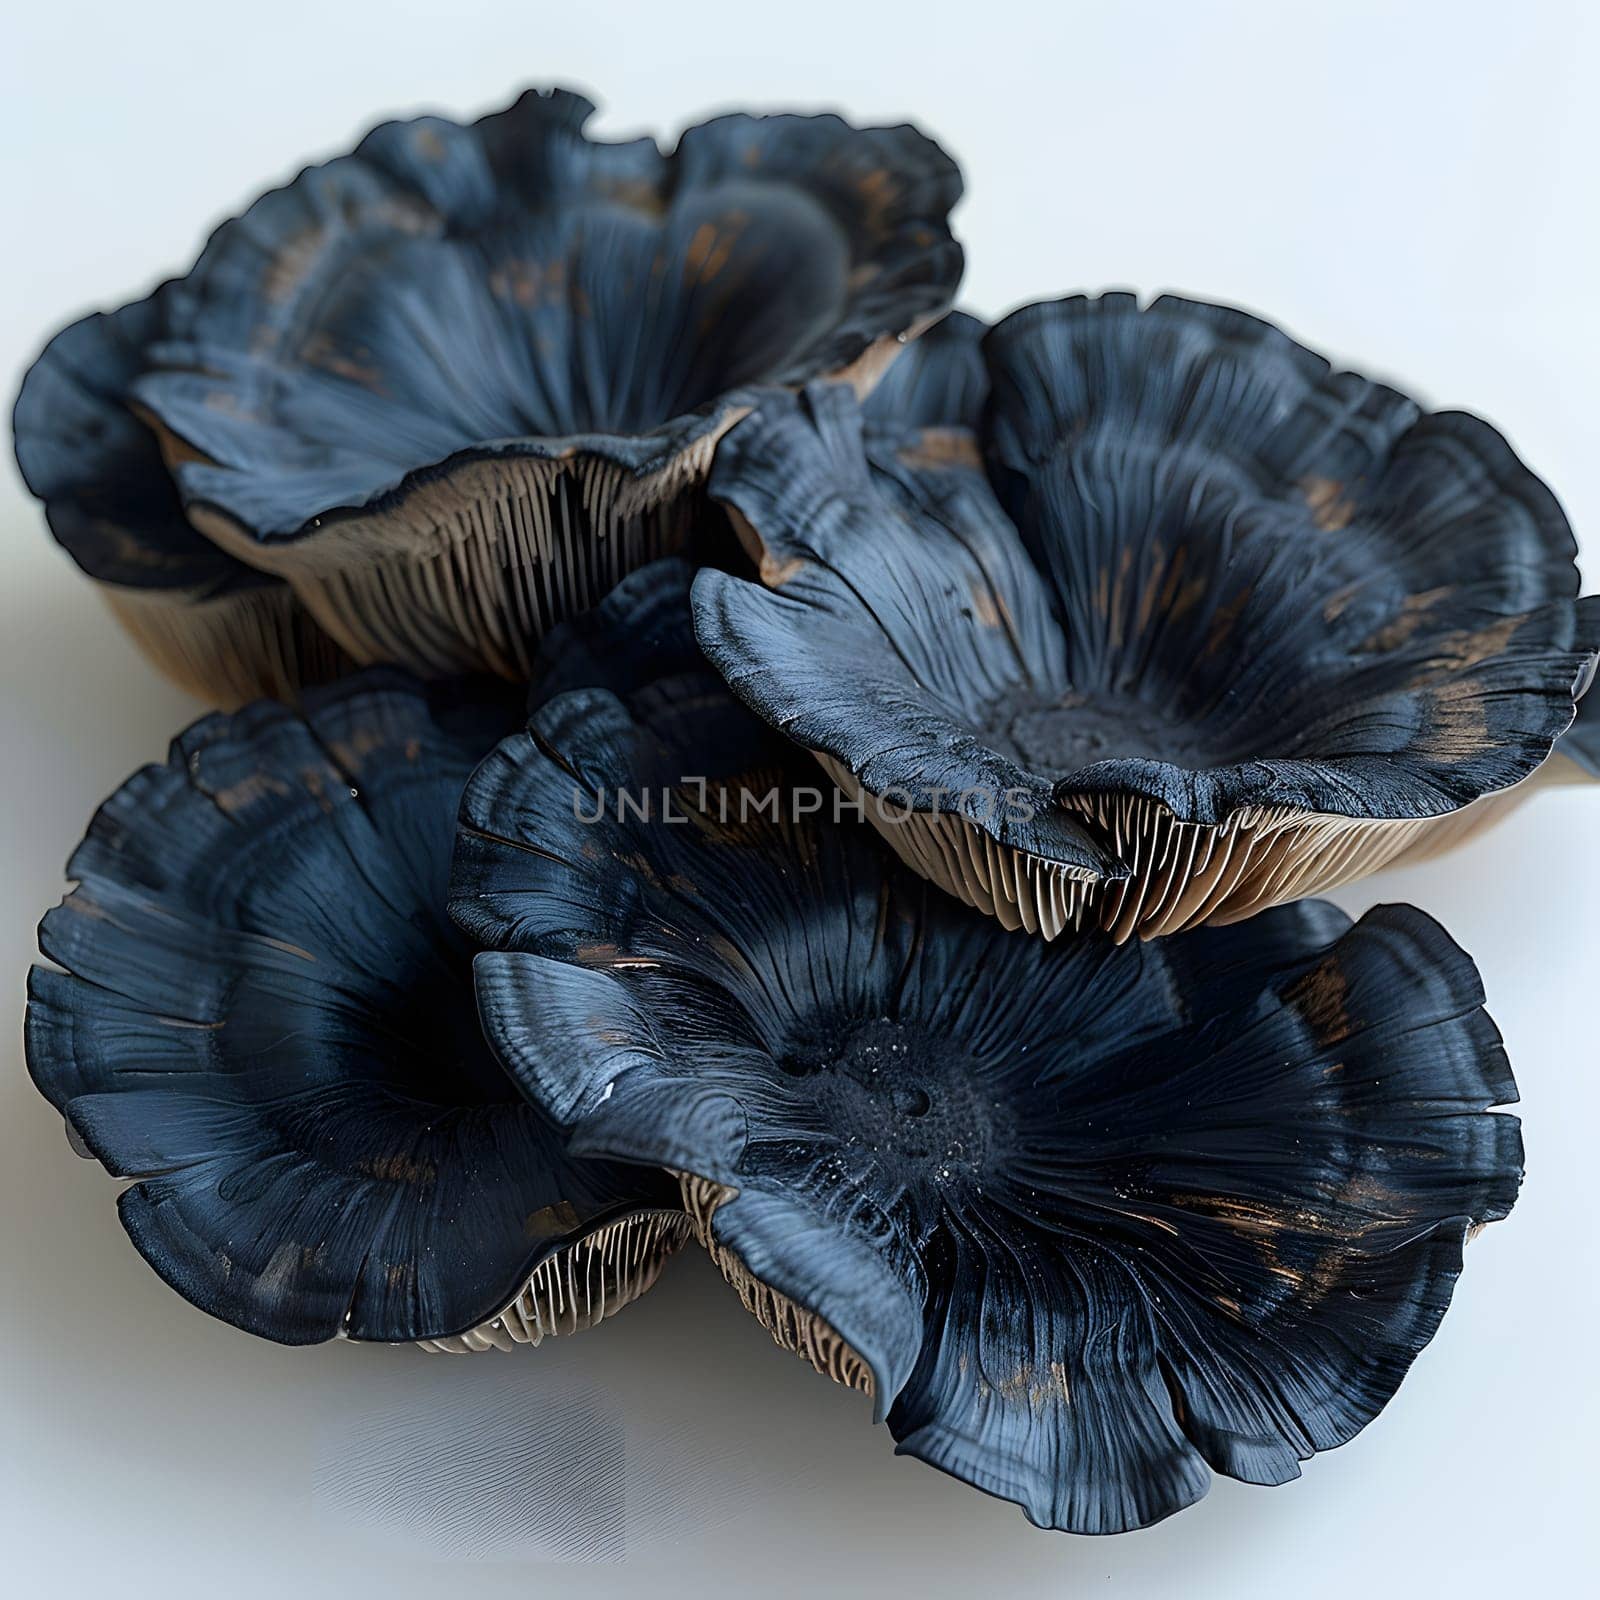 A fashion accessory made of electric blue patterned invertebrate fur resembling a bunch of black flowers on a white surface, styled as a hair bun cap